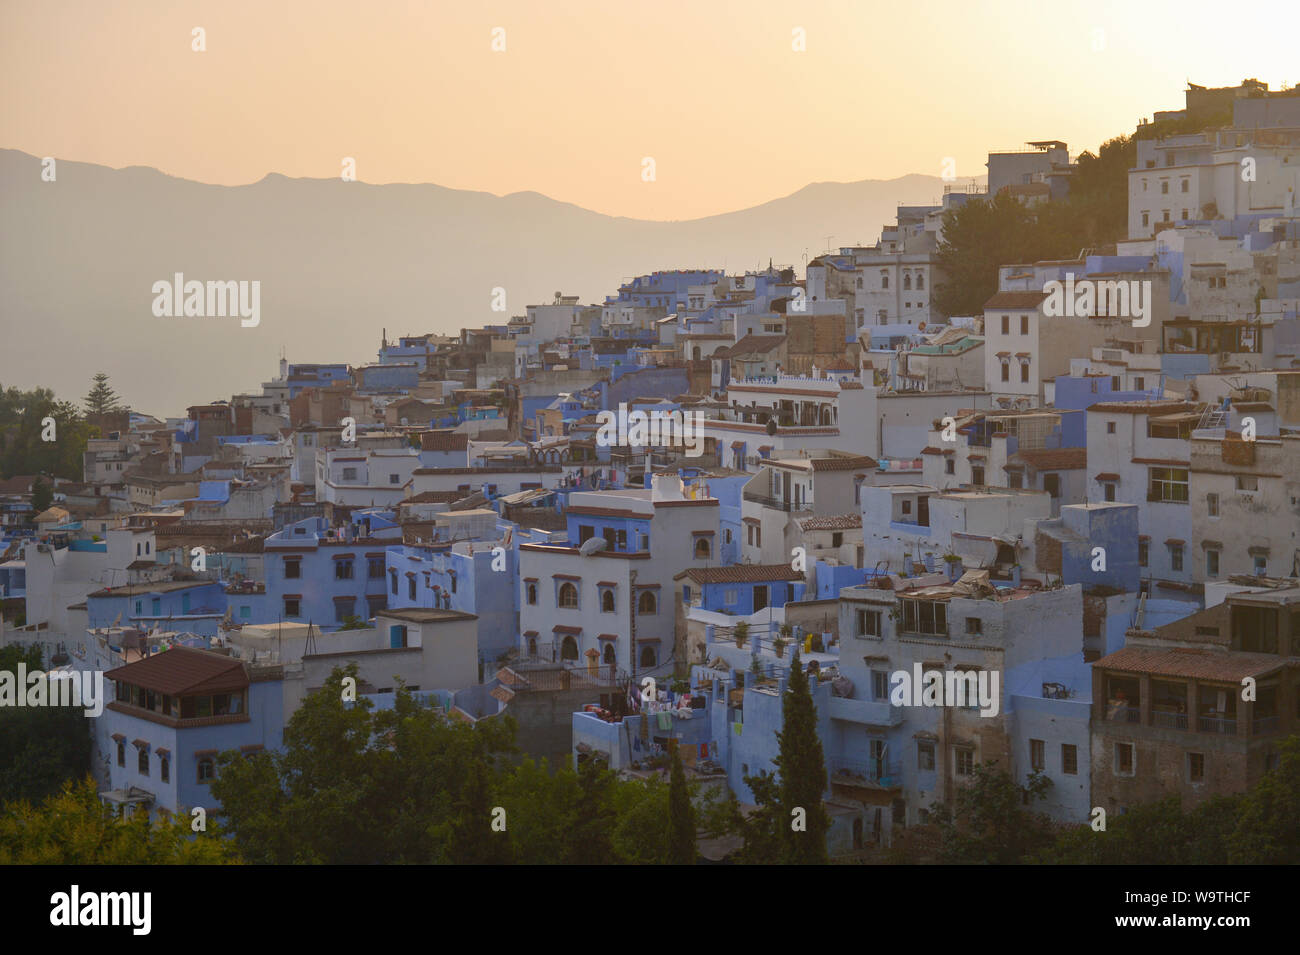 Cityscape at sunset, Chefchaouen, Morocco Stock Photo